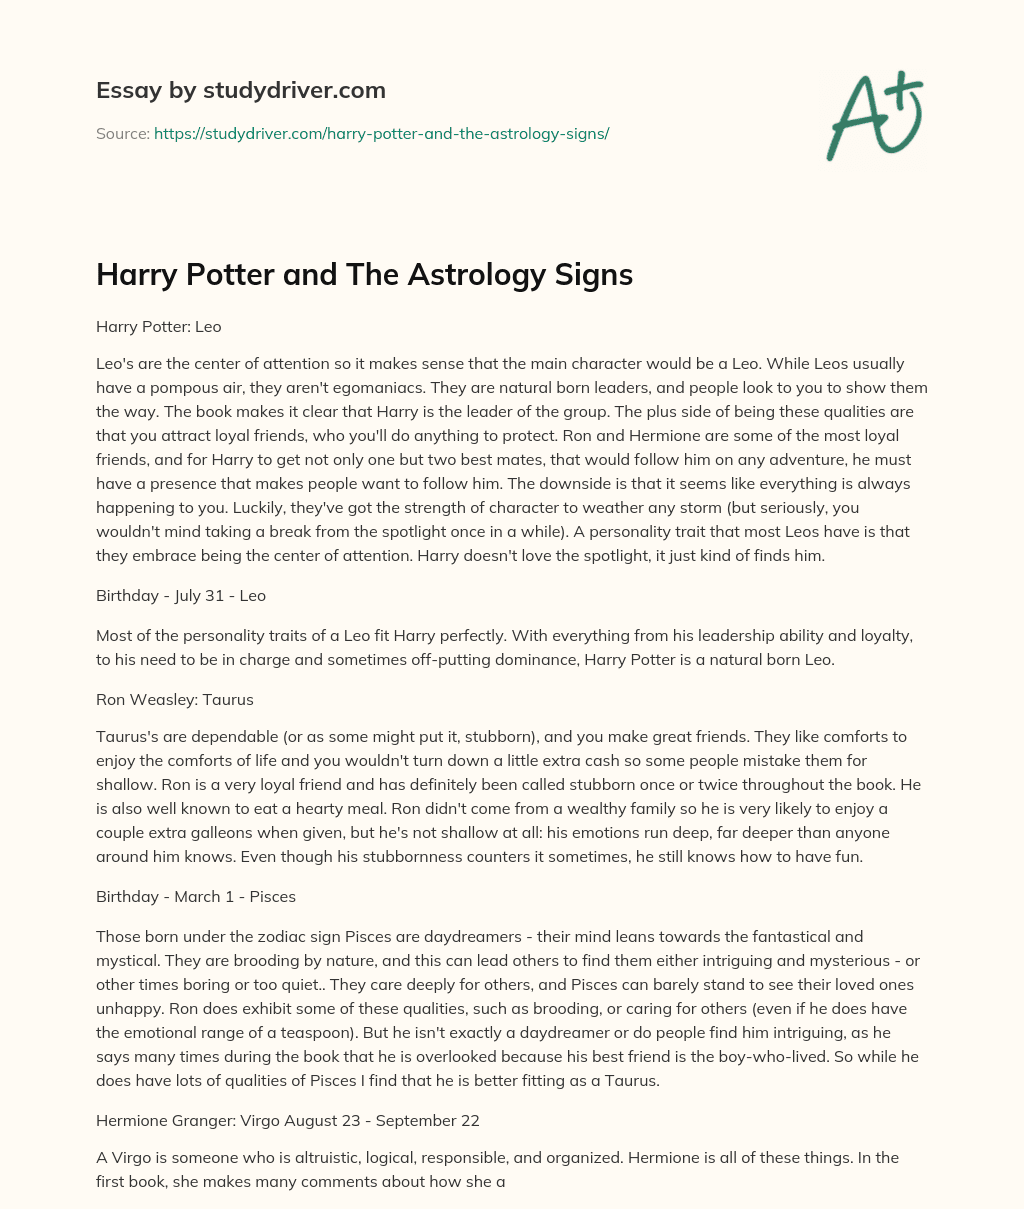 Harry Potter and the Astrology Signs essay